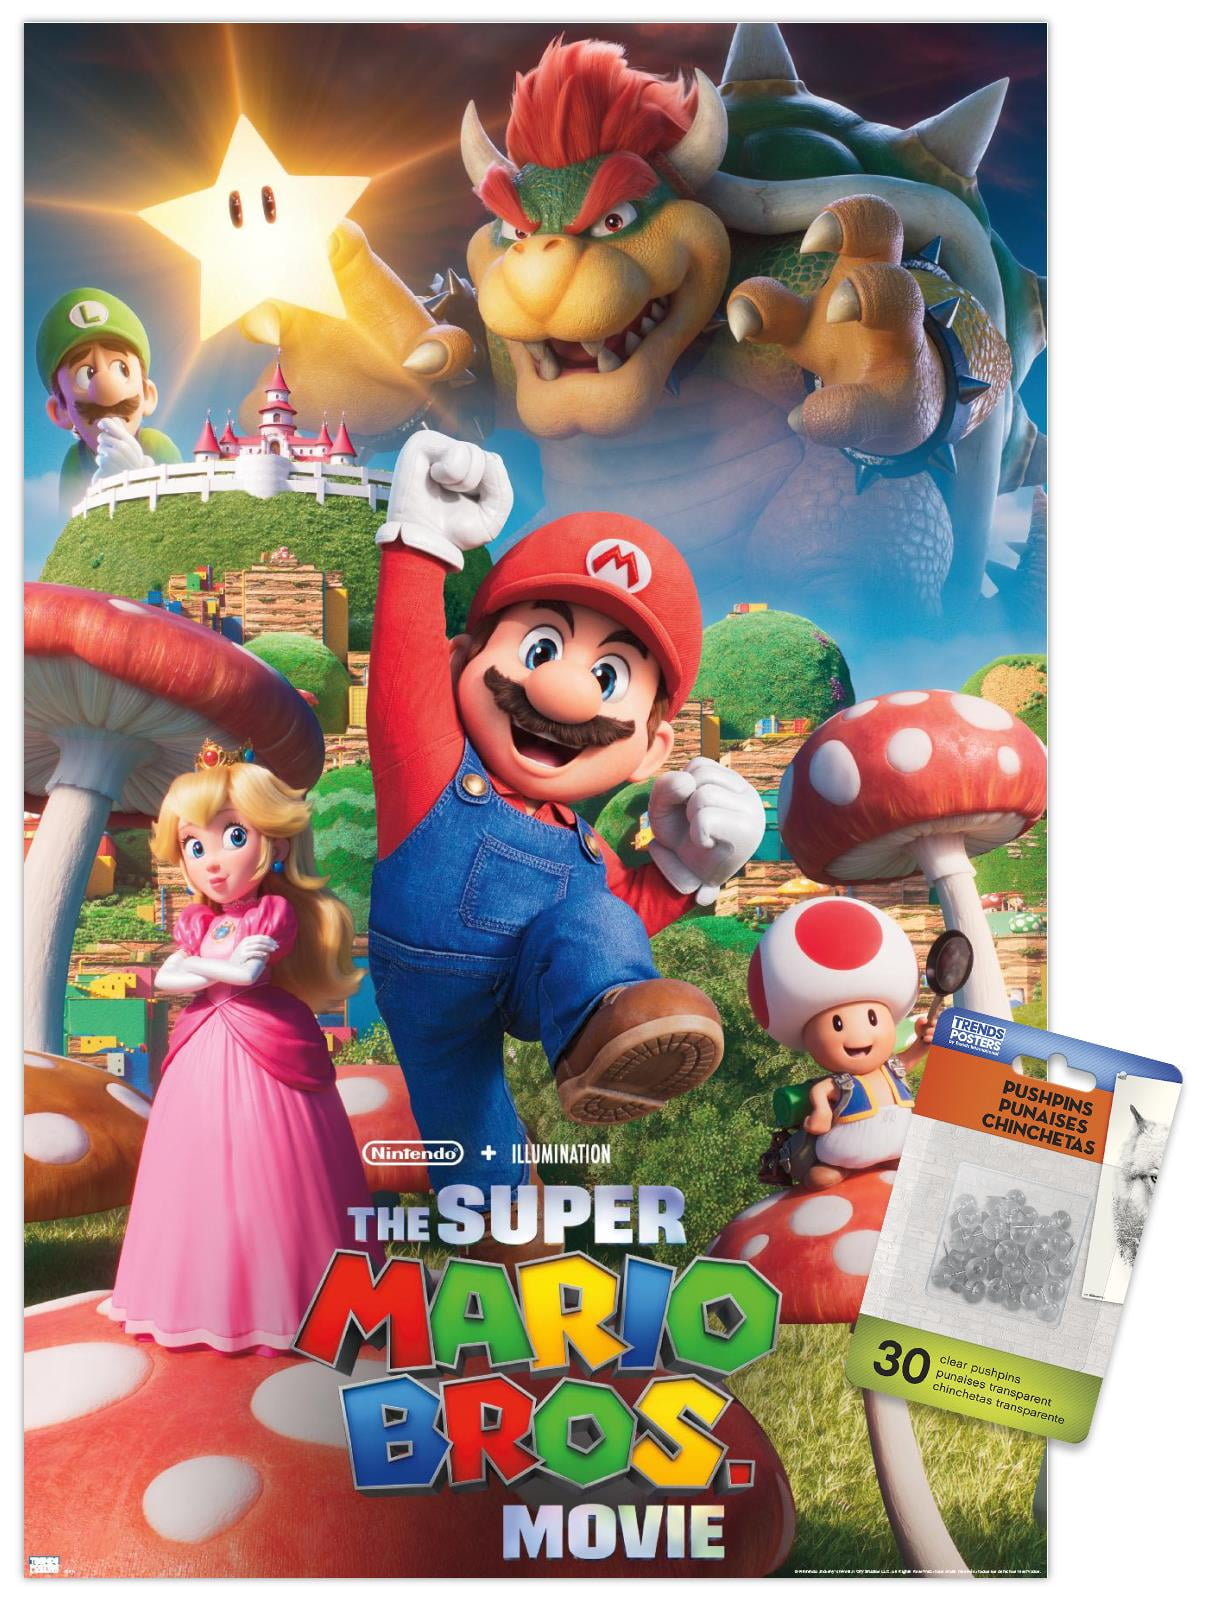 Nintendo Mario Paint Posters Set - 4 PC Bundle with Super Mario Painting Activity Book, 600+ Stickers, and More | Super Mario Coloring and Activities